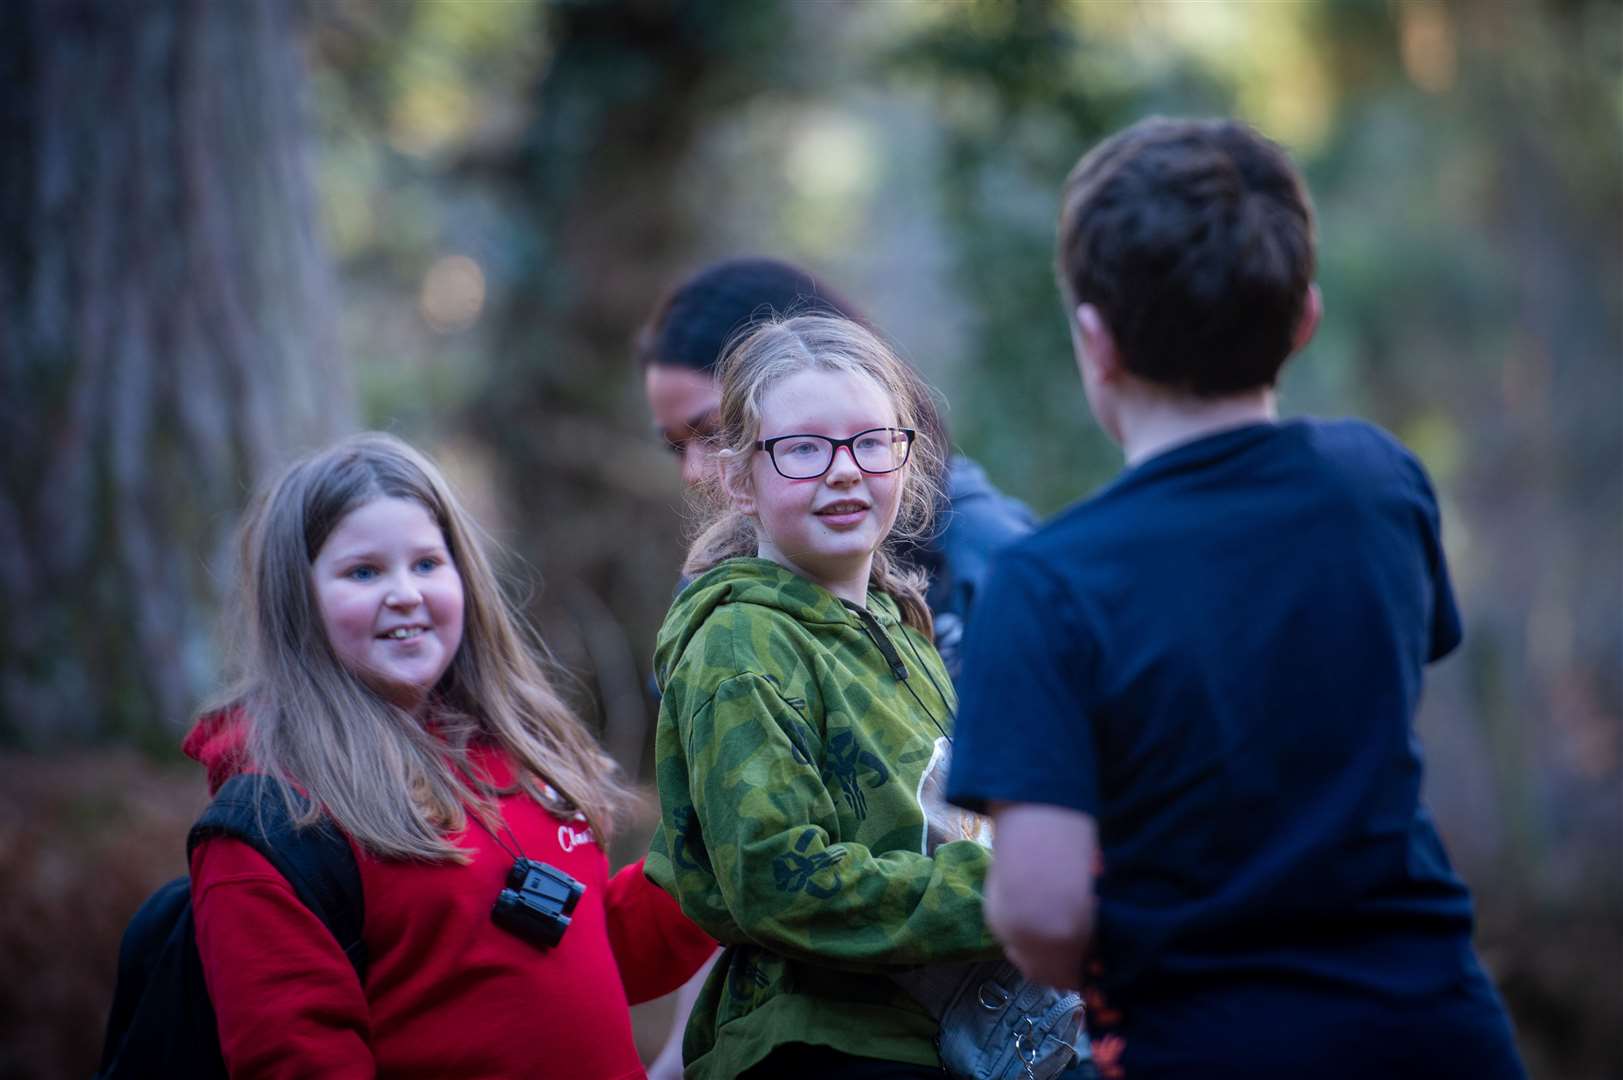 Clarity Walks Kids, Craig Dunain, Inverness - 90 minutes of walking through forest trails, tree/wildlife discovery, forest crafts, and mindfulness activities...Evie skeoch and Chloe Grassick...Picture: Callum Mackay..